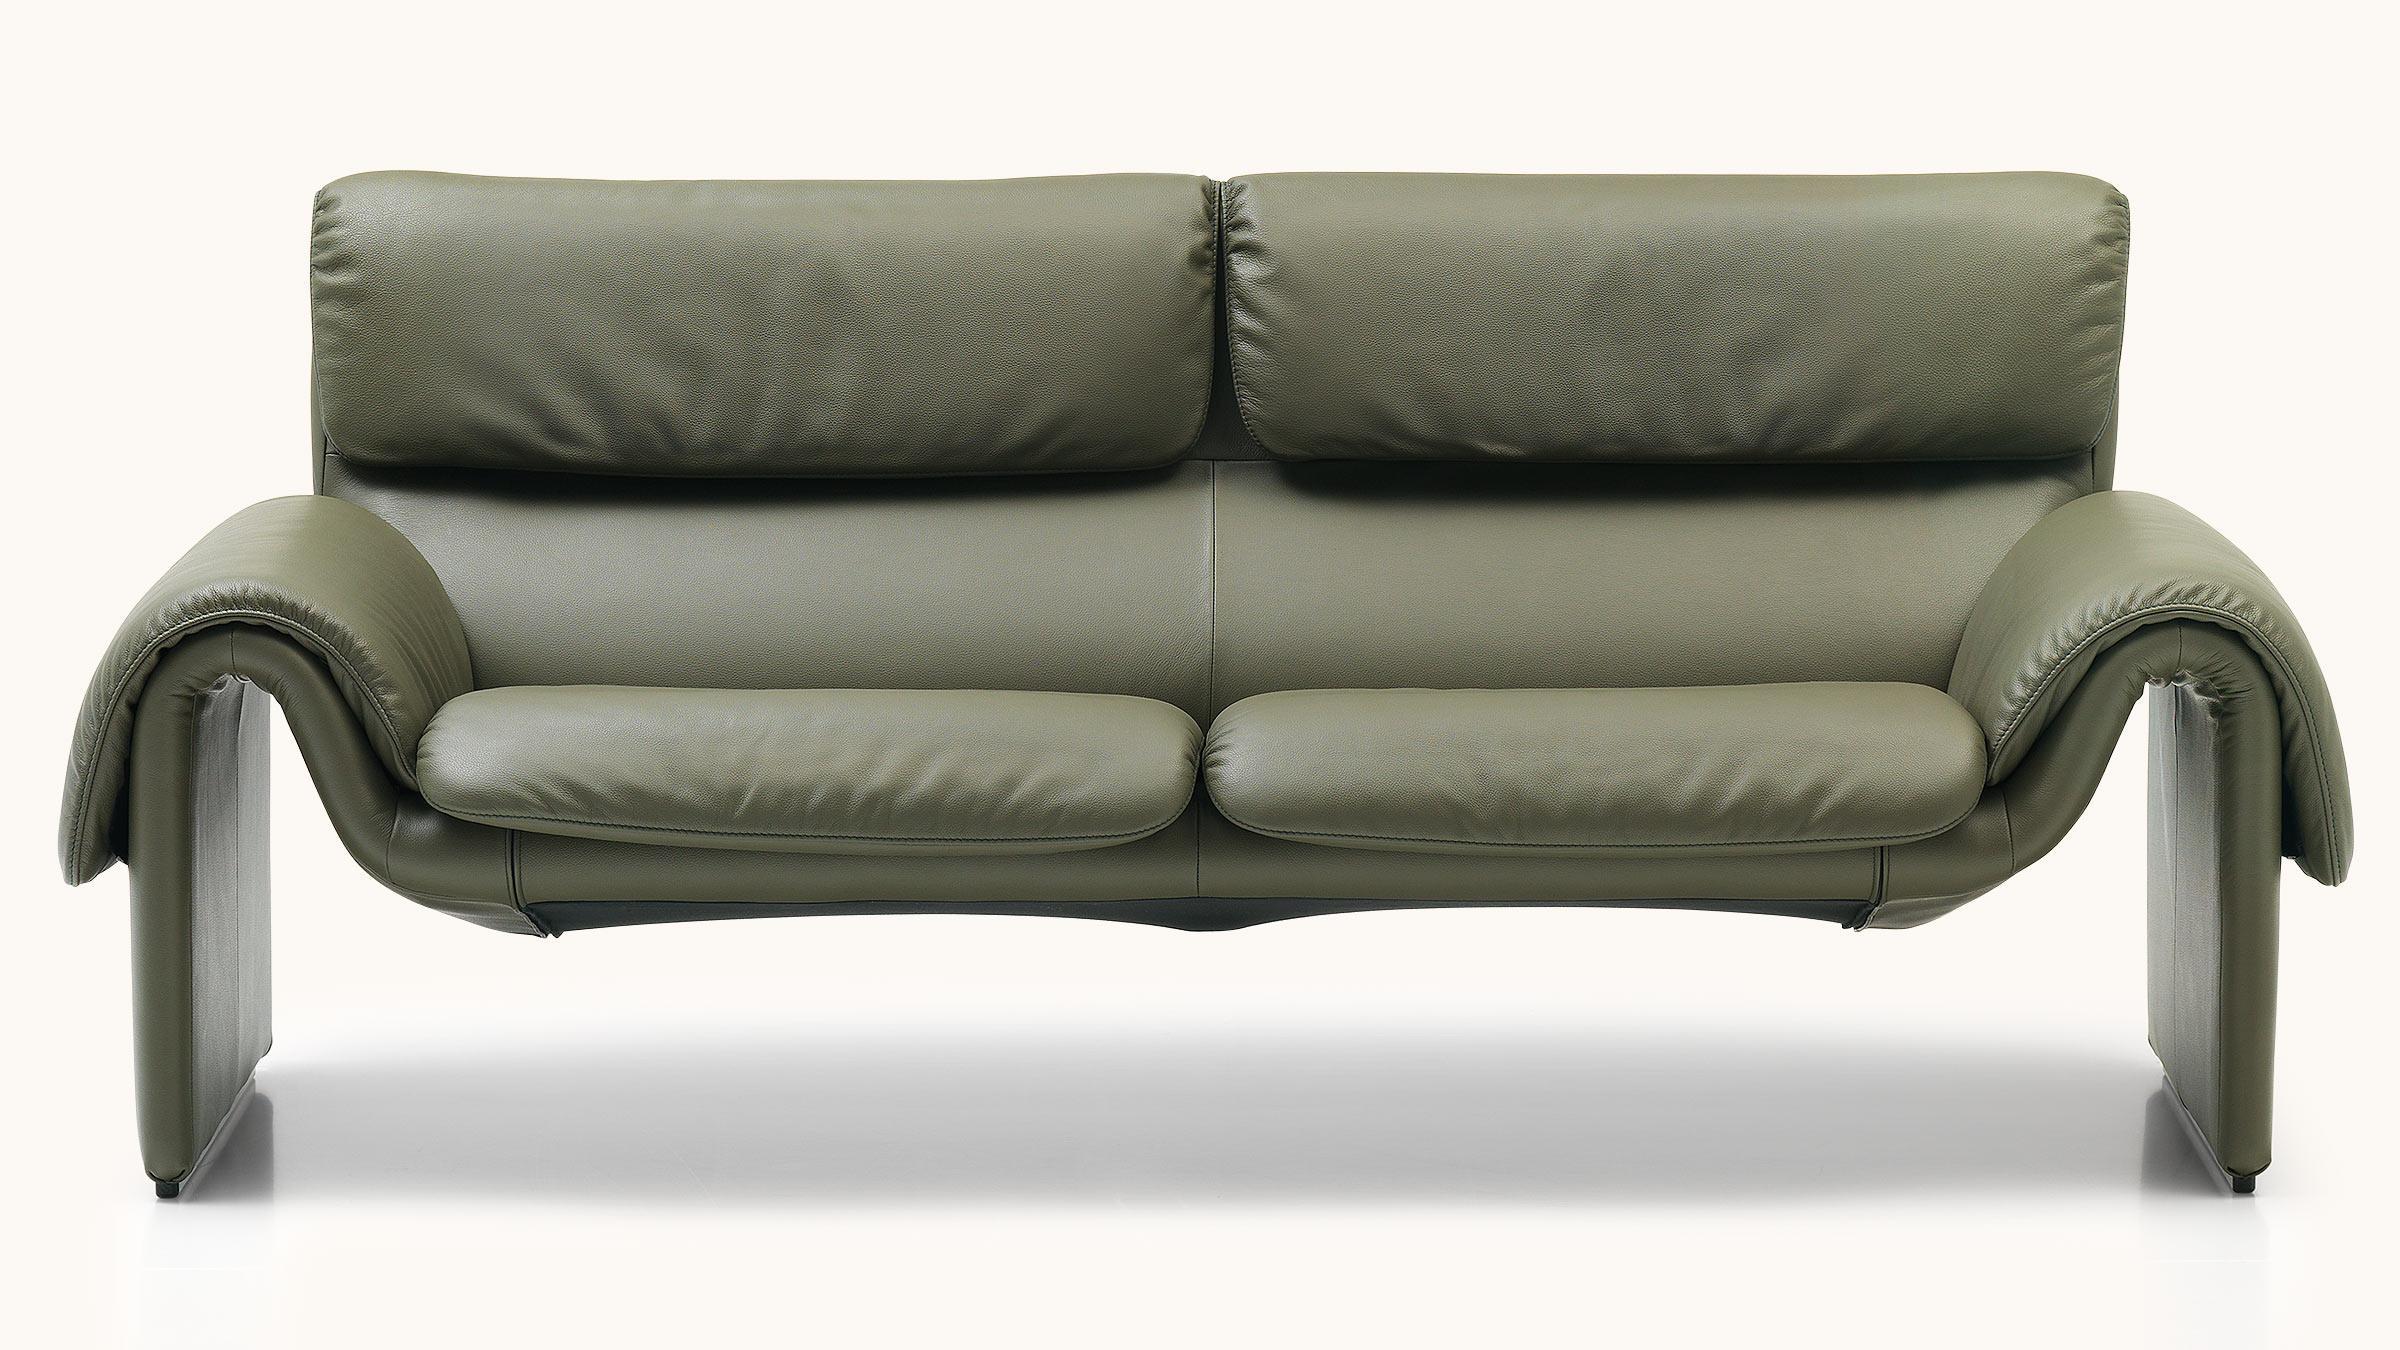 Modern De Sede Ds-2011 Two-Seat Sofa in Jade Upholstery by De Sede Design Team For Sale